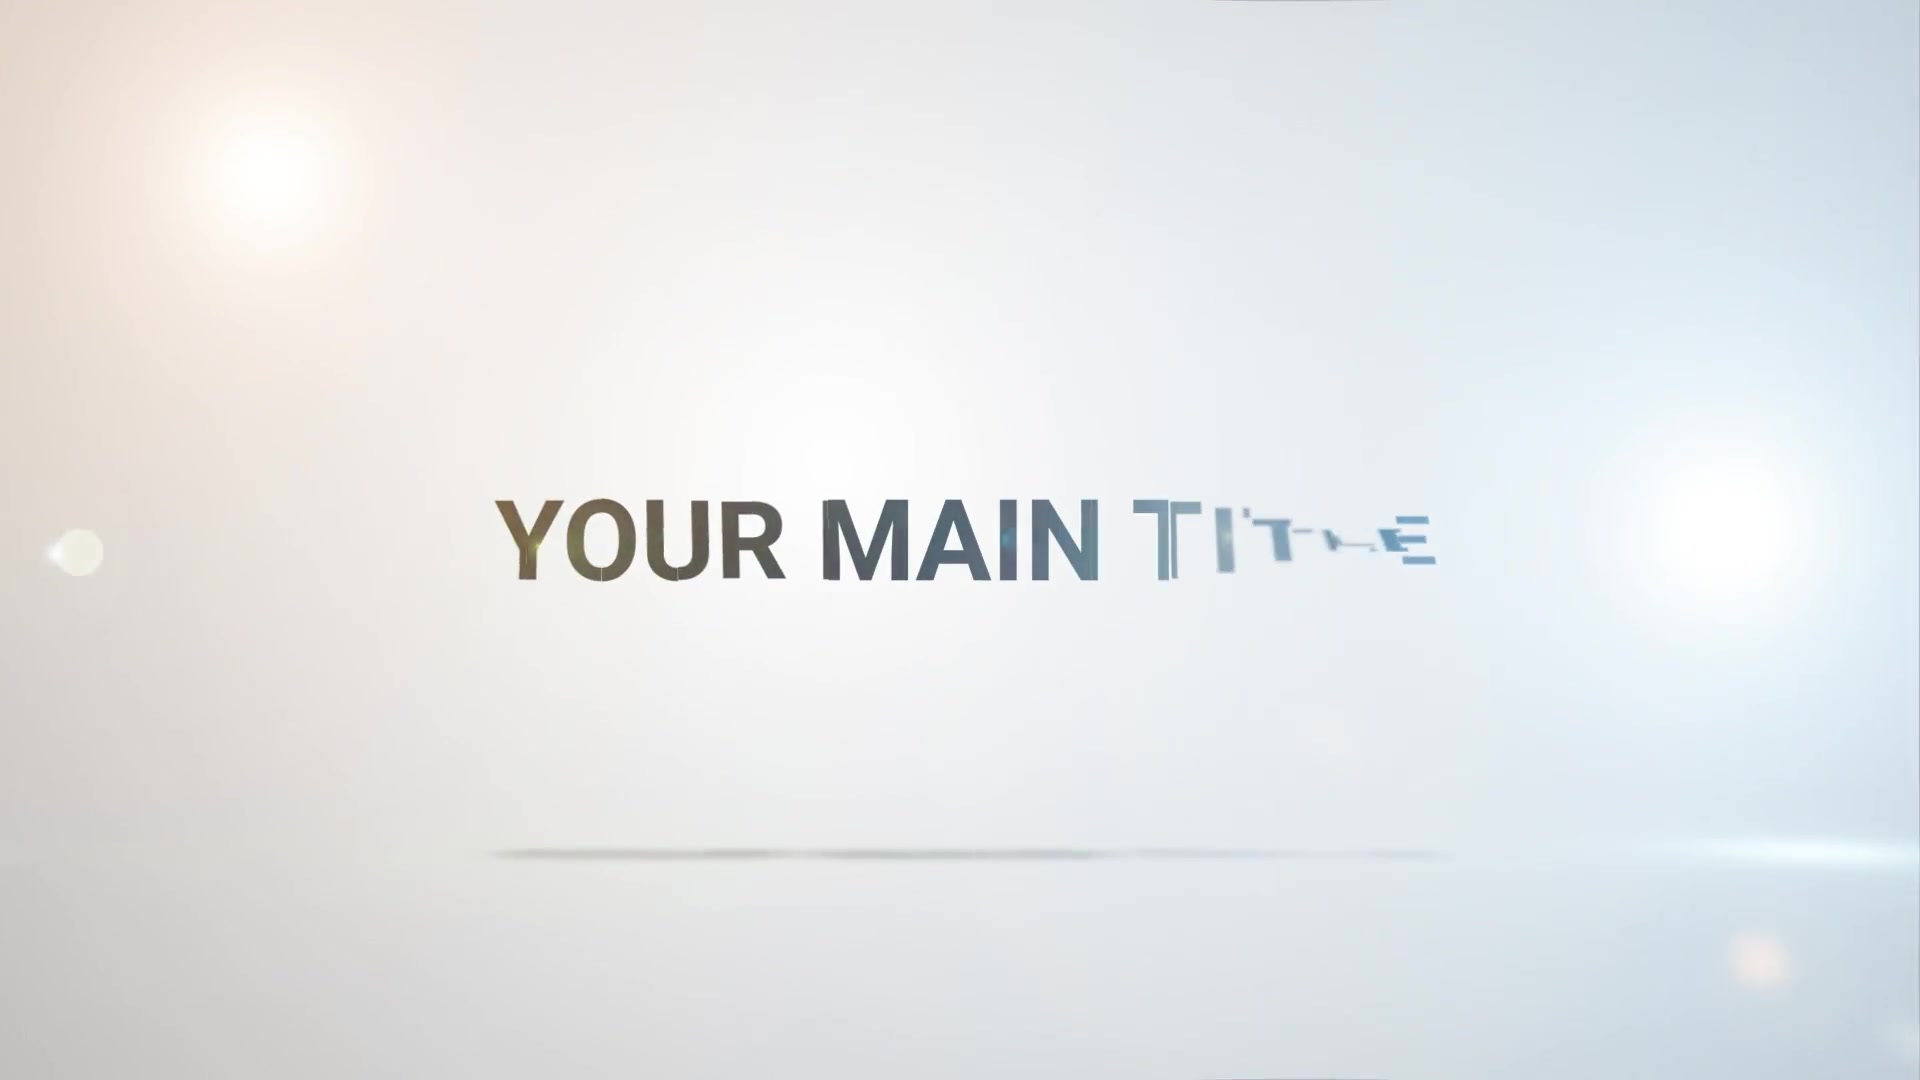 Clean Title Reveal - Download Videohive 21817502